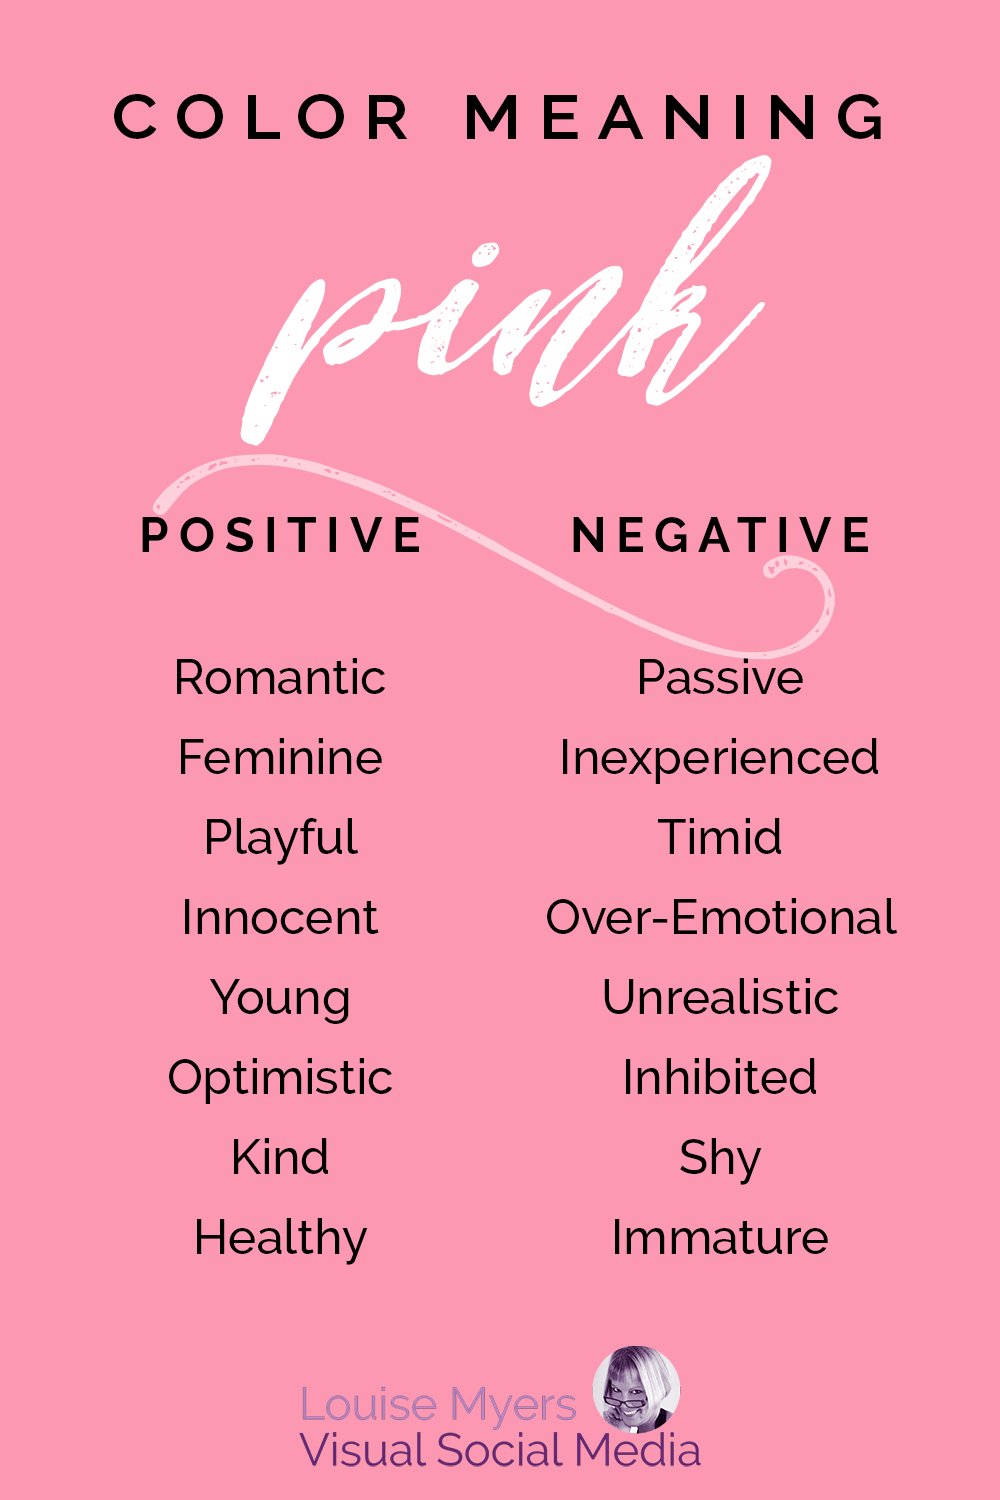 pink graphic lists different positive and negative aspects of the color pink.